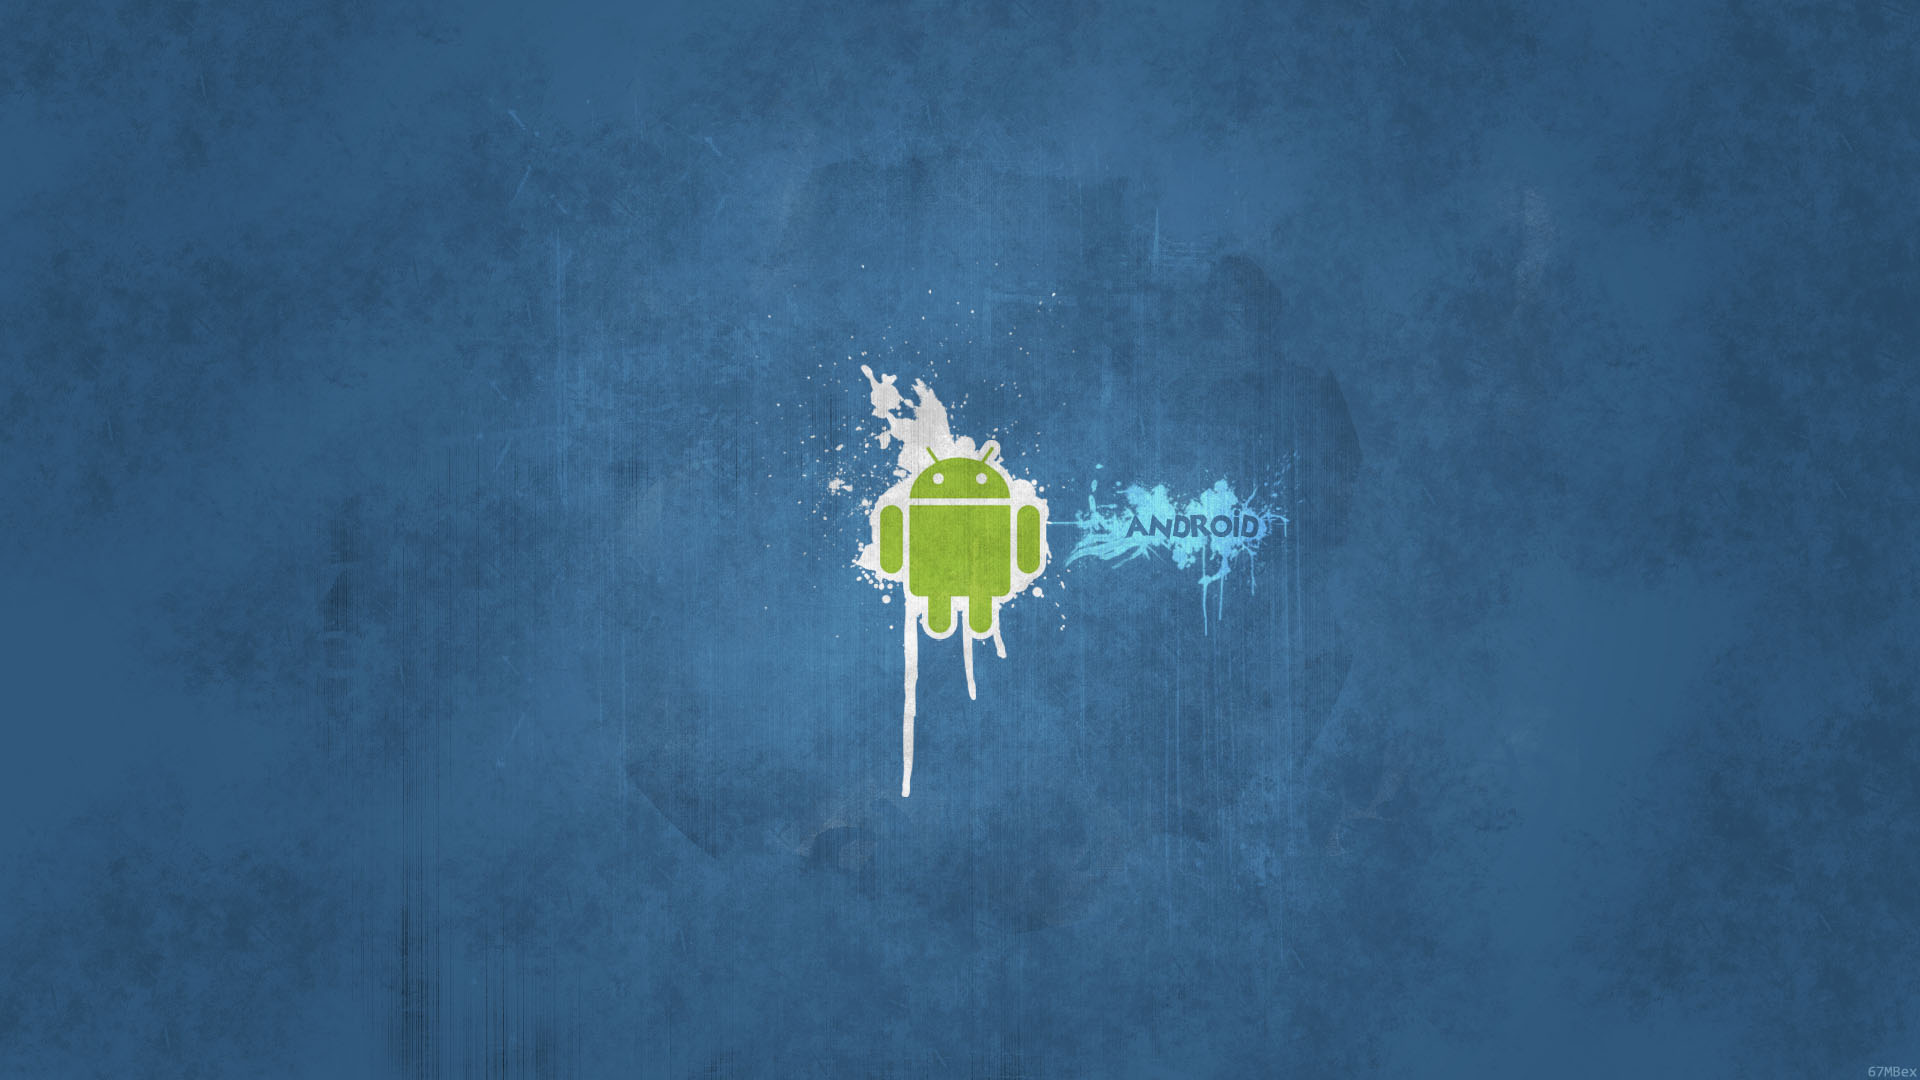 Android Logo Blue Background HD Wallpaper Image Free Download